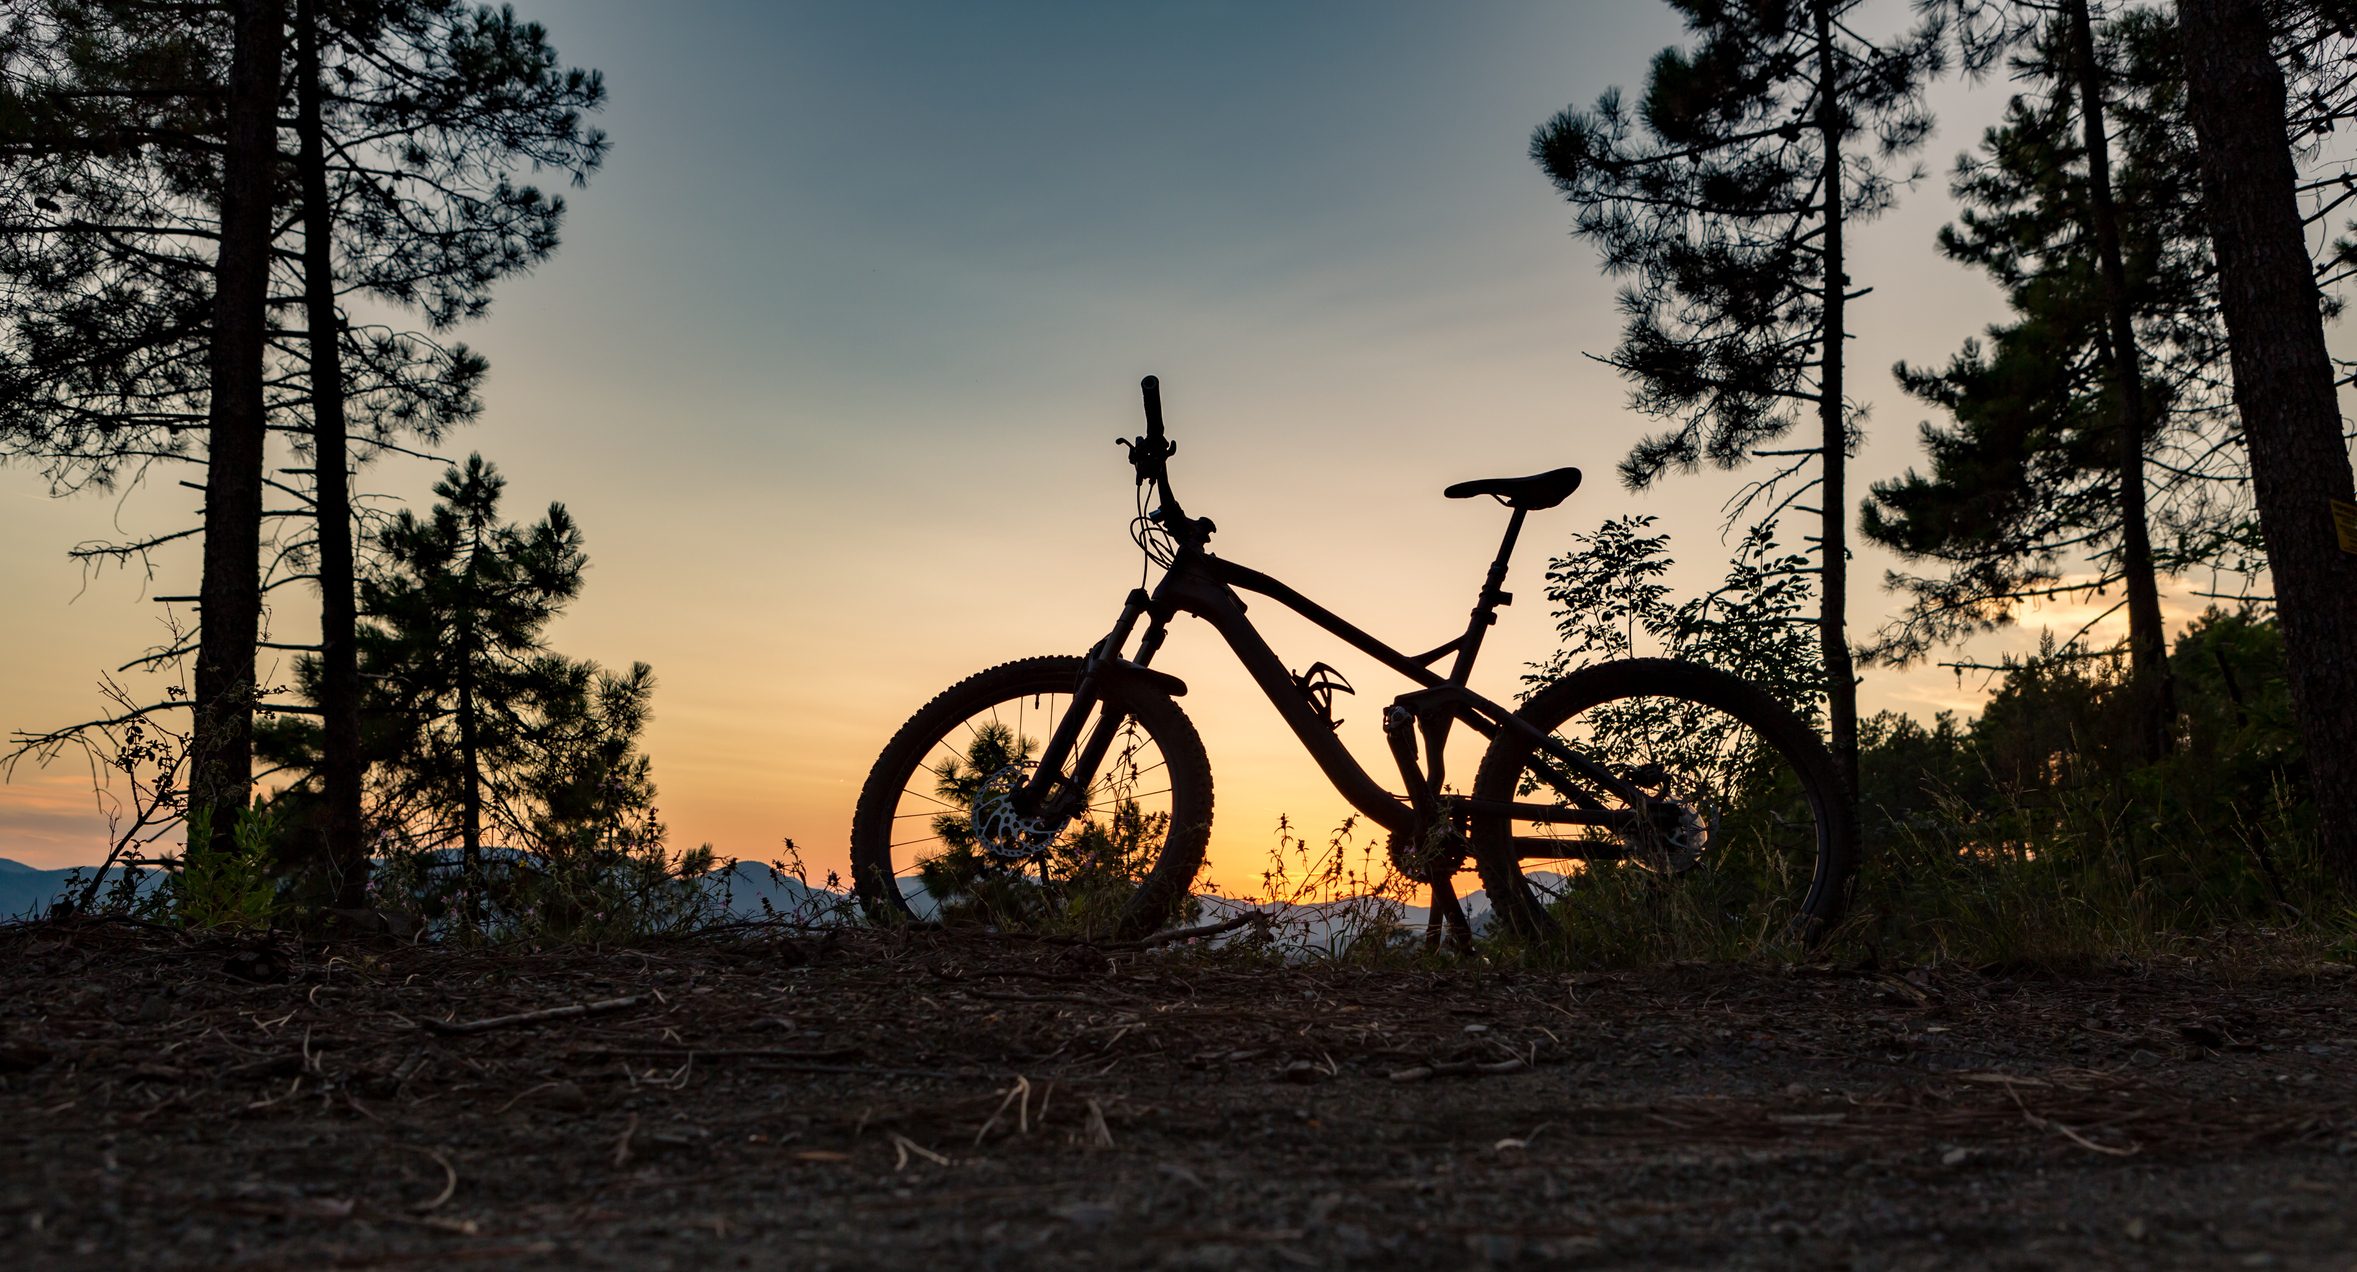 The silhouette of a mountain bike on a bike trail in Asheville, NC.